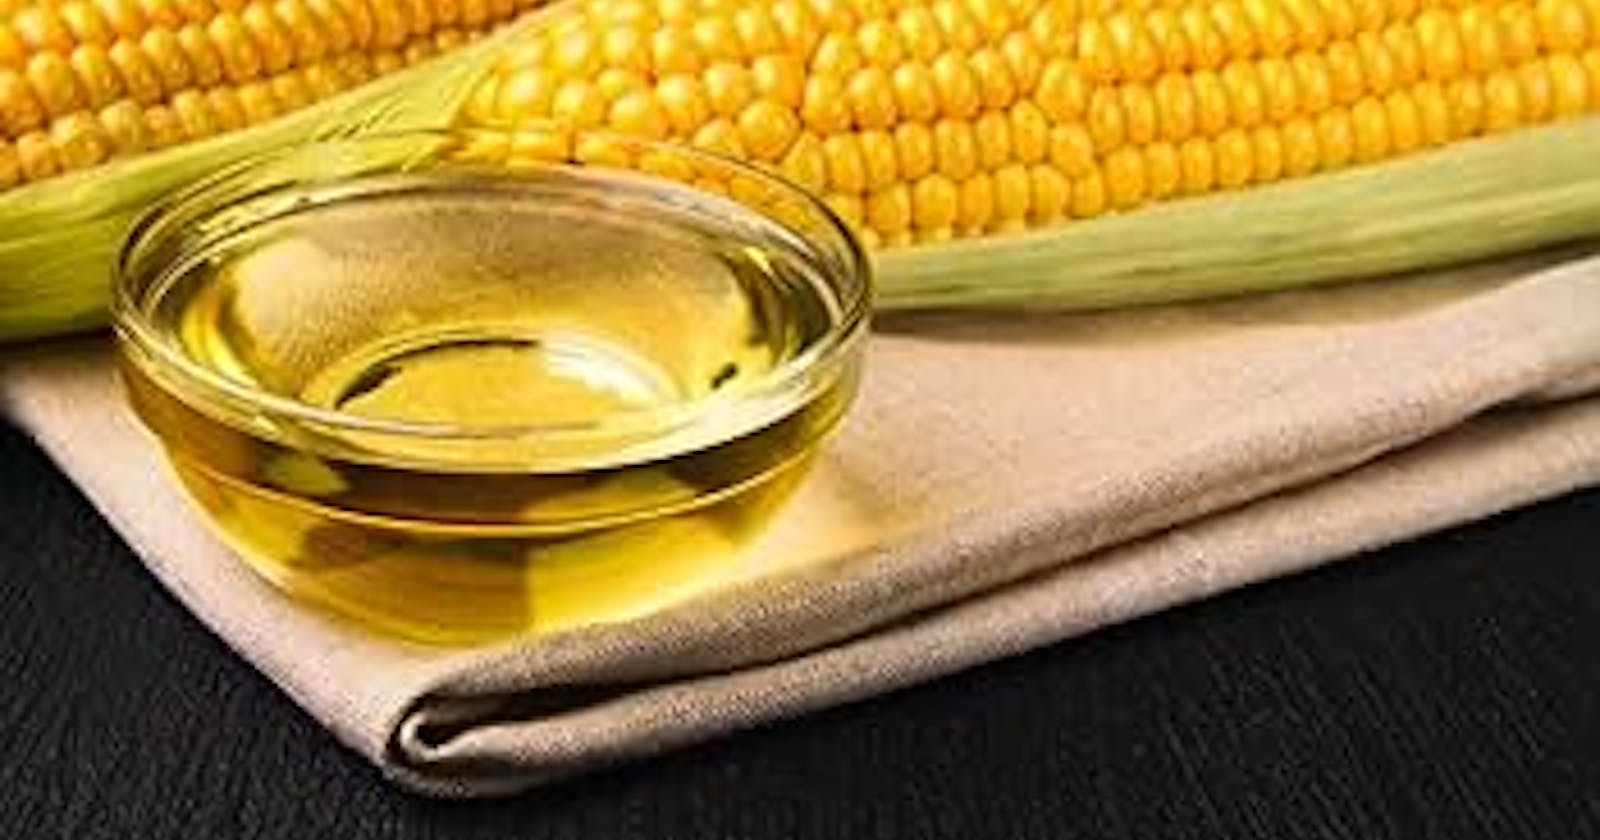 Corn Oil Market Trends, Scope, Demand, Opportunity and Forecast 2023-2028